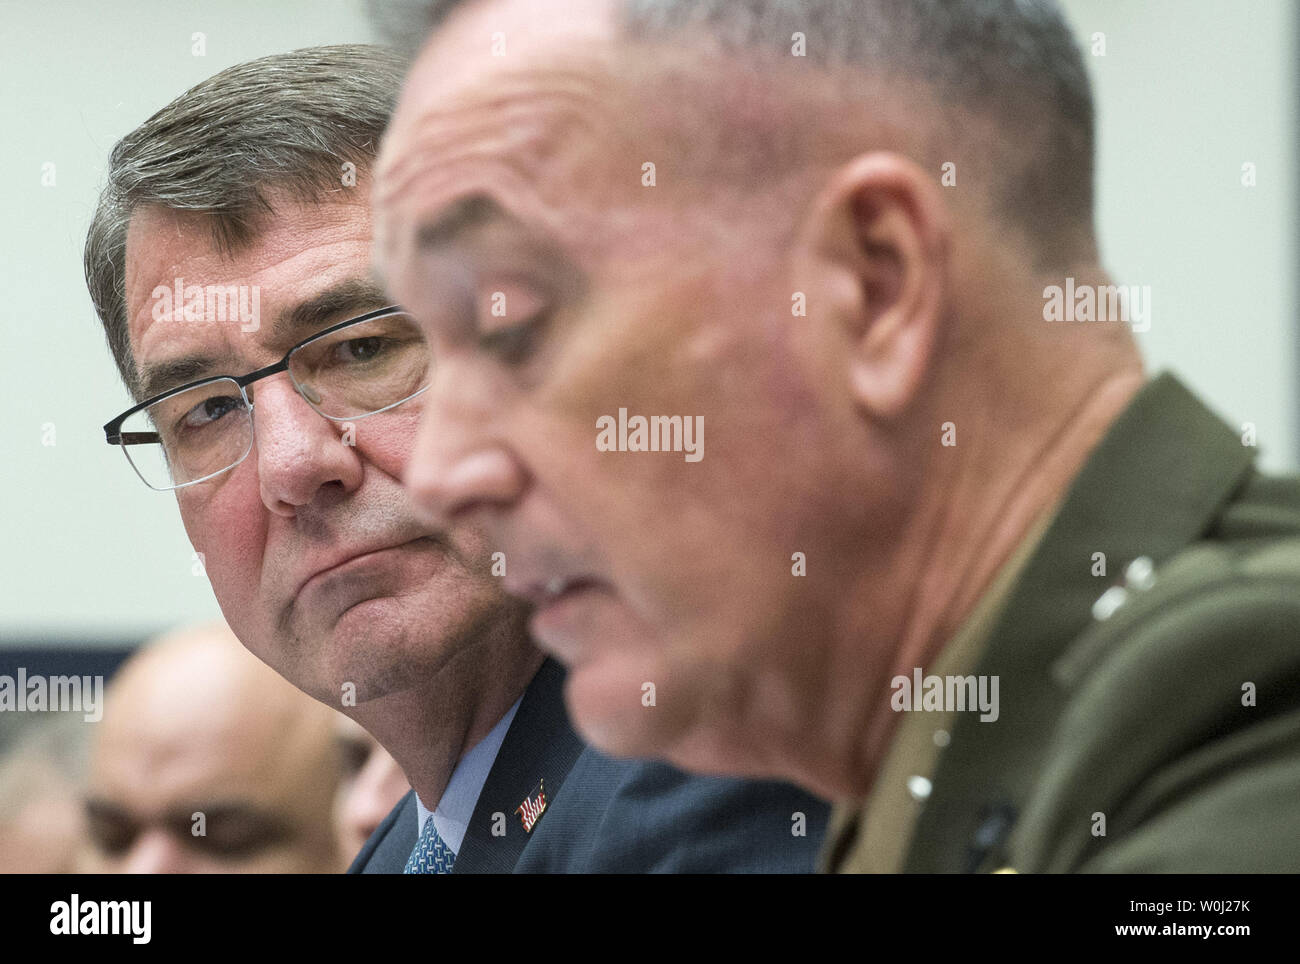 Secretary of Defense Ashton Carter (L) and  Chairman of the Joint Chiefs of Staff General Joseph F. Dunford, Jr., USMC, testify during a House Armed Services Committee hearing on the U.S. Strategy for Syria and Iraq and its implications for the region, on Capitol Hill in Washington, D.C. on December 1, 2015. Photo by Kevin Dietsch/UPI. Stock Photo